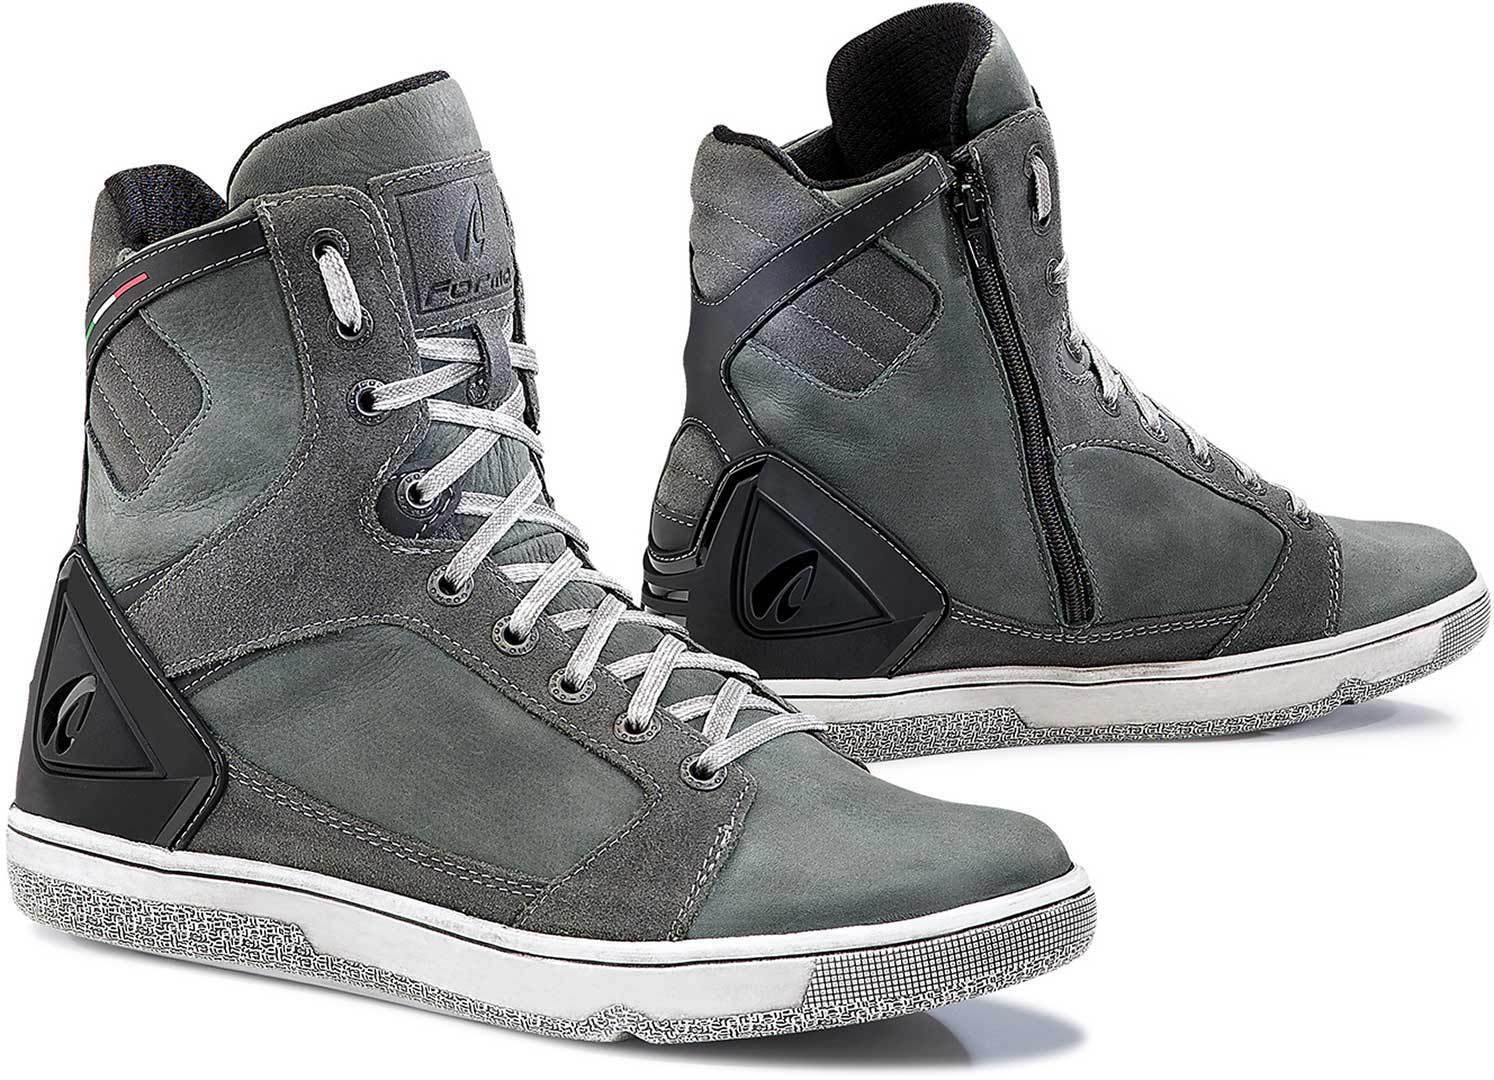 Photos - Motorcycle Boots Forma Hyper Dry Waterproof Motorcycle Shoes Unisex Grey Size: 47 foru09w90 